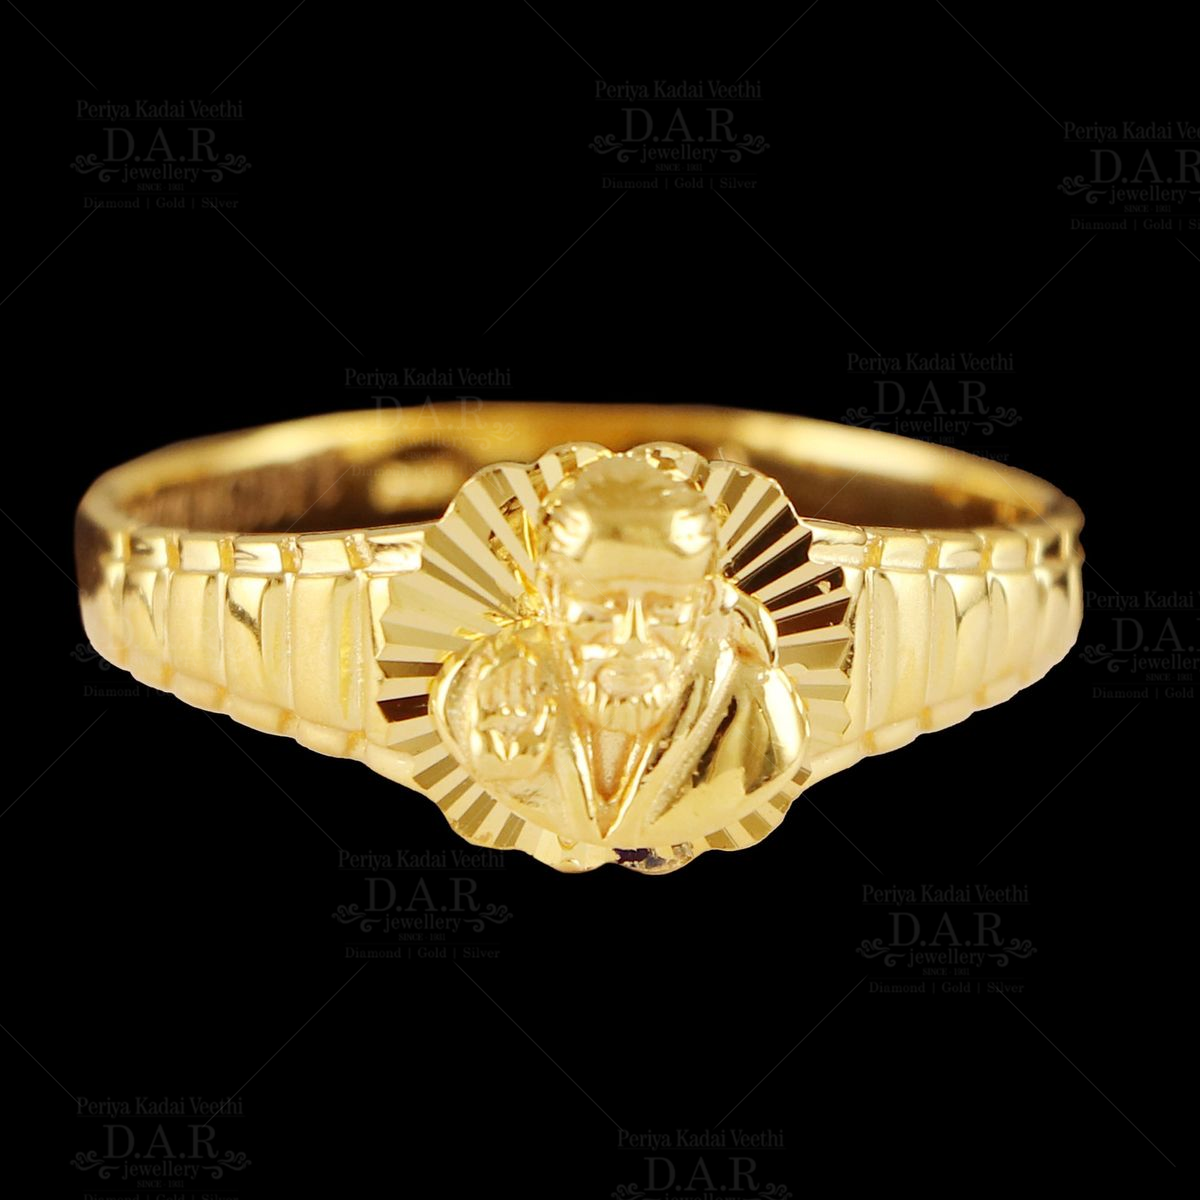 22K Sai Baba Gold Ring - AjRi56577 - 22k gold mens ring, designed with  religious Lord Sai Baba on the top of the ring in matte and shine